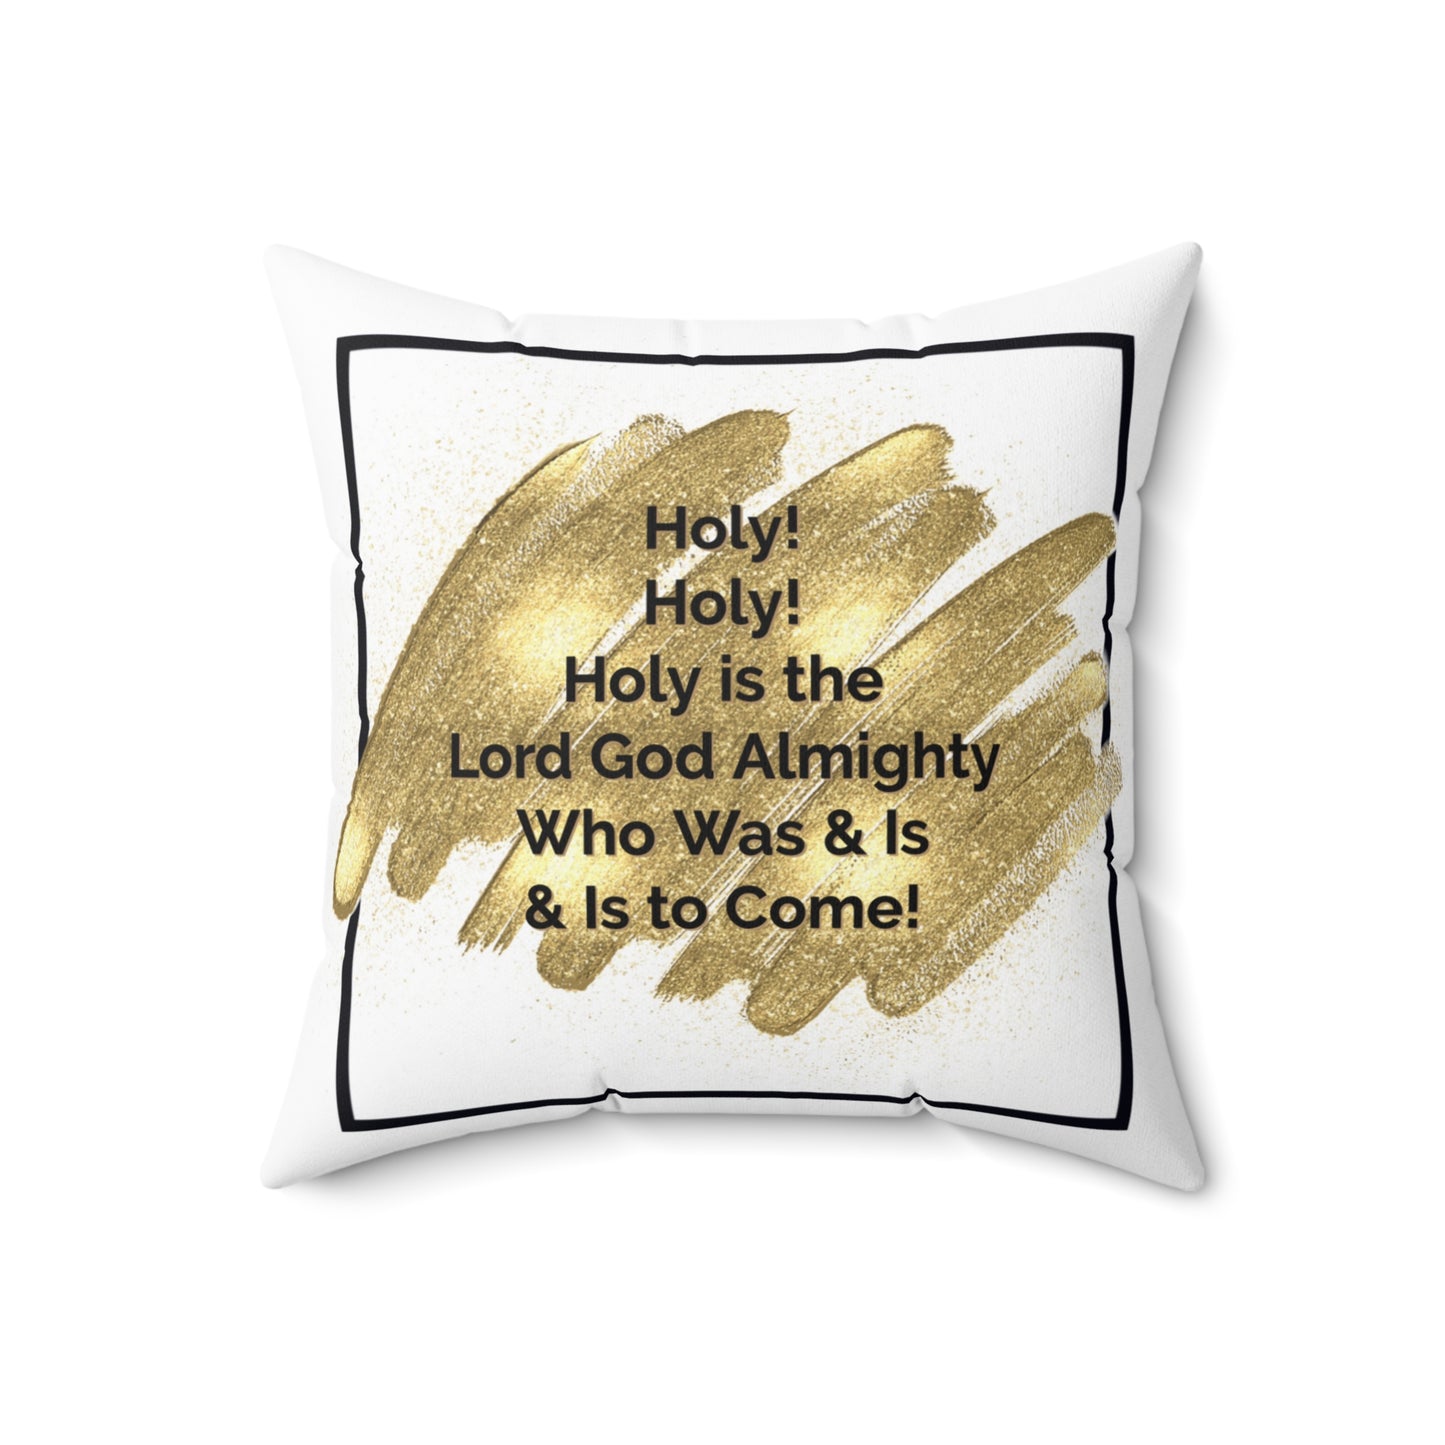 Bold, Classic Pillow Accent Pillow - Holy, Holy, Holy